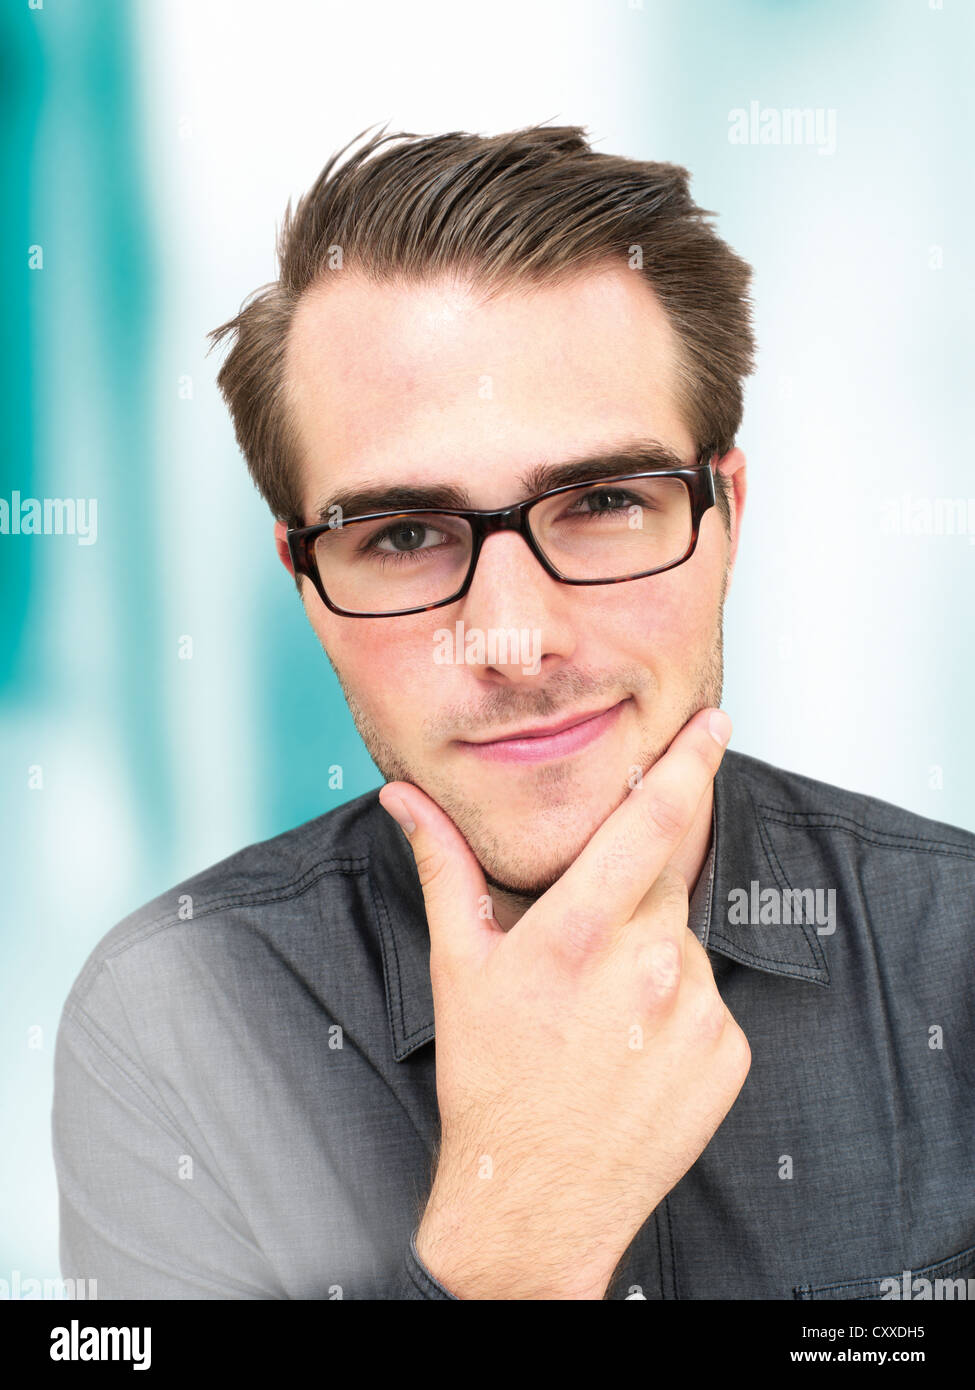 Young businessman wearing glasses, portrait, sly glance Stock Photo - Alamy